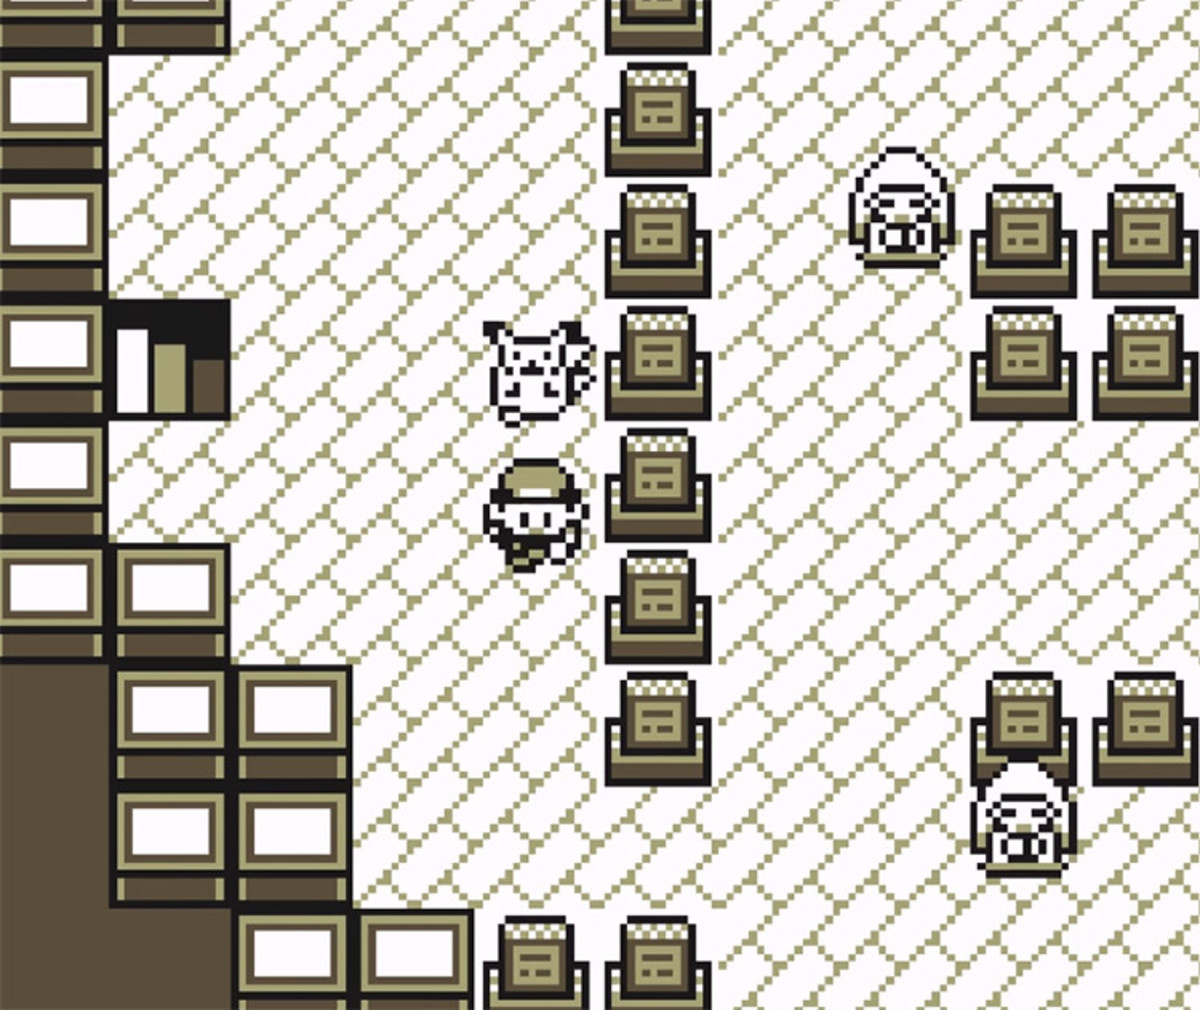 The Pokémon Tower in Lavender Town is scary enough, but a legend spread across the web about "Lavender Town Syndrome" which cast a grim shadow over this segment in the game.